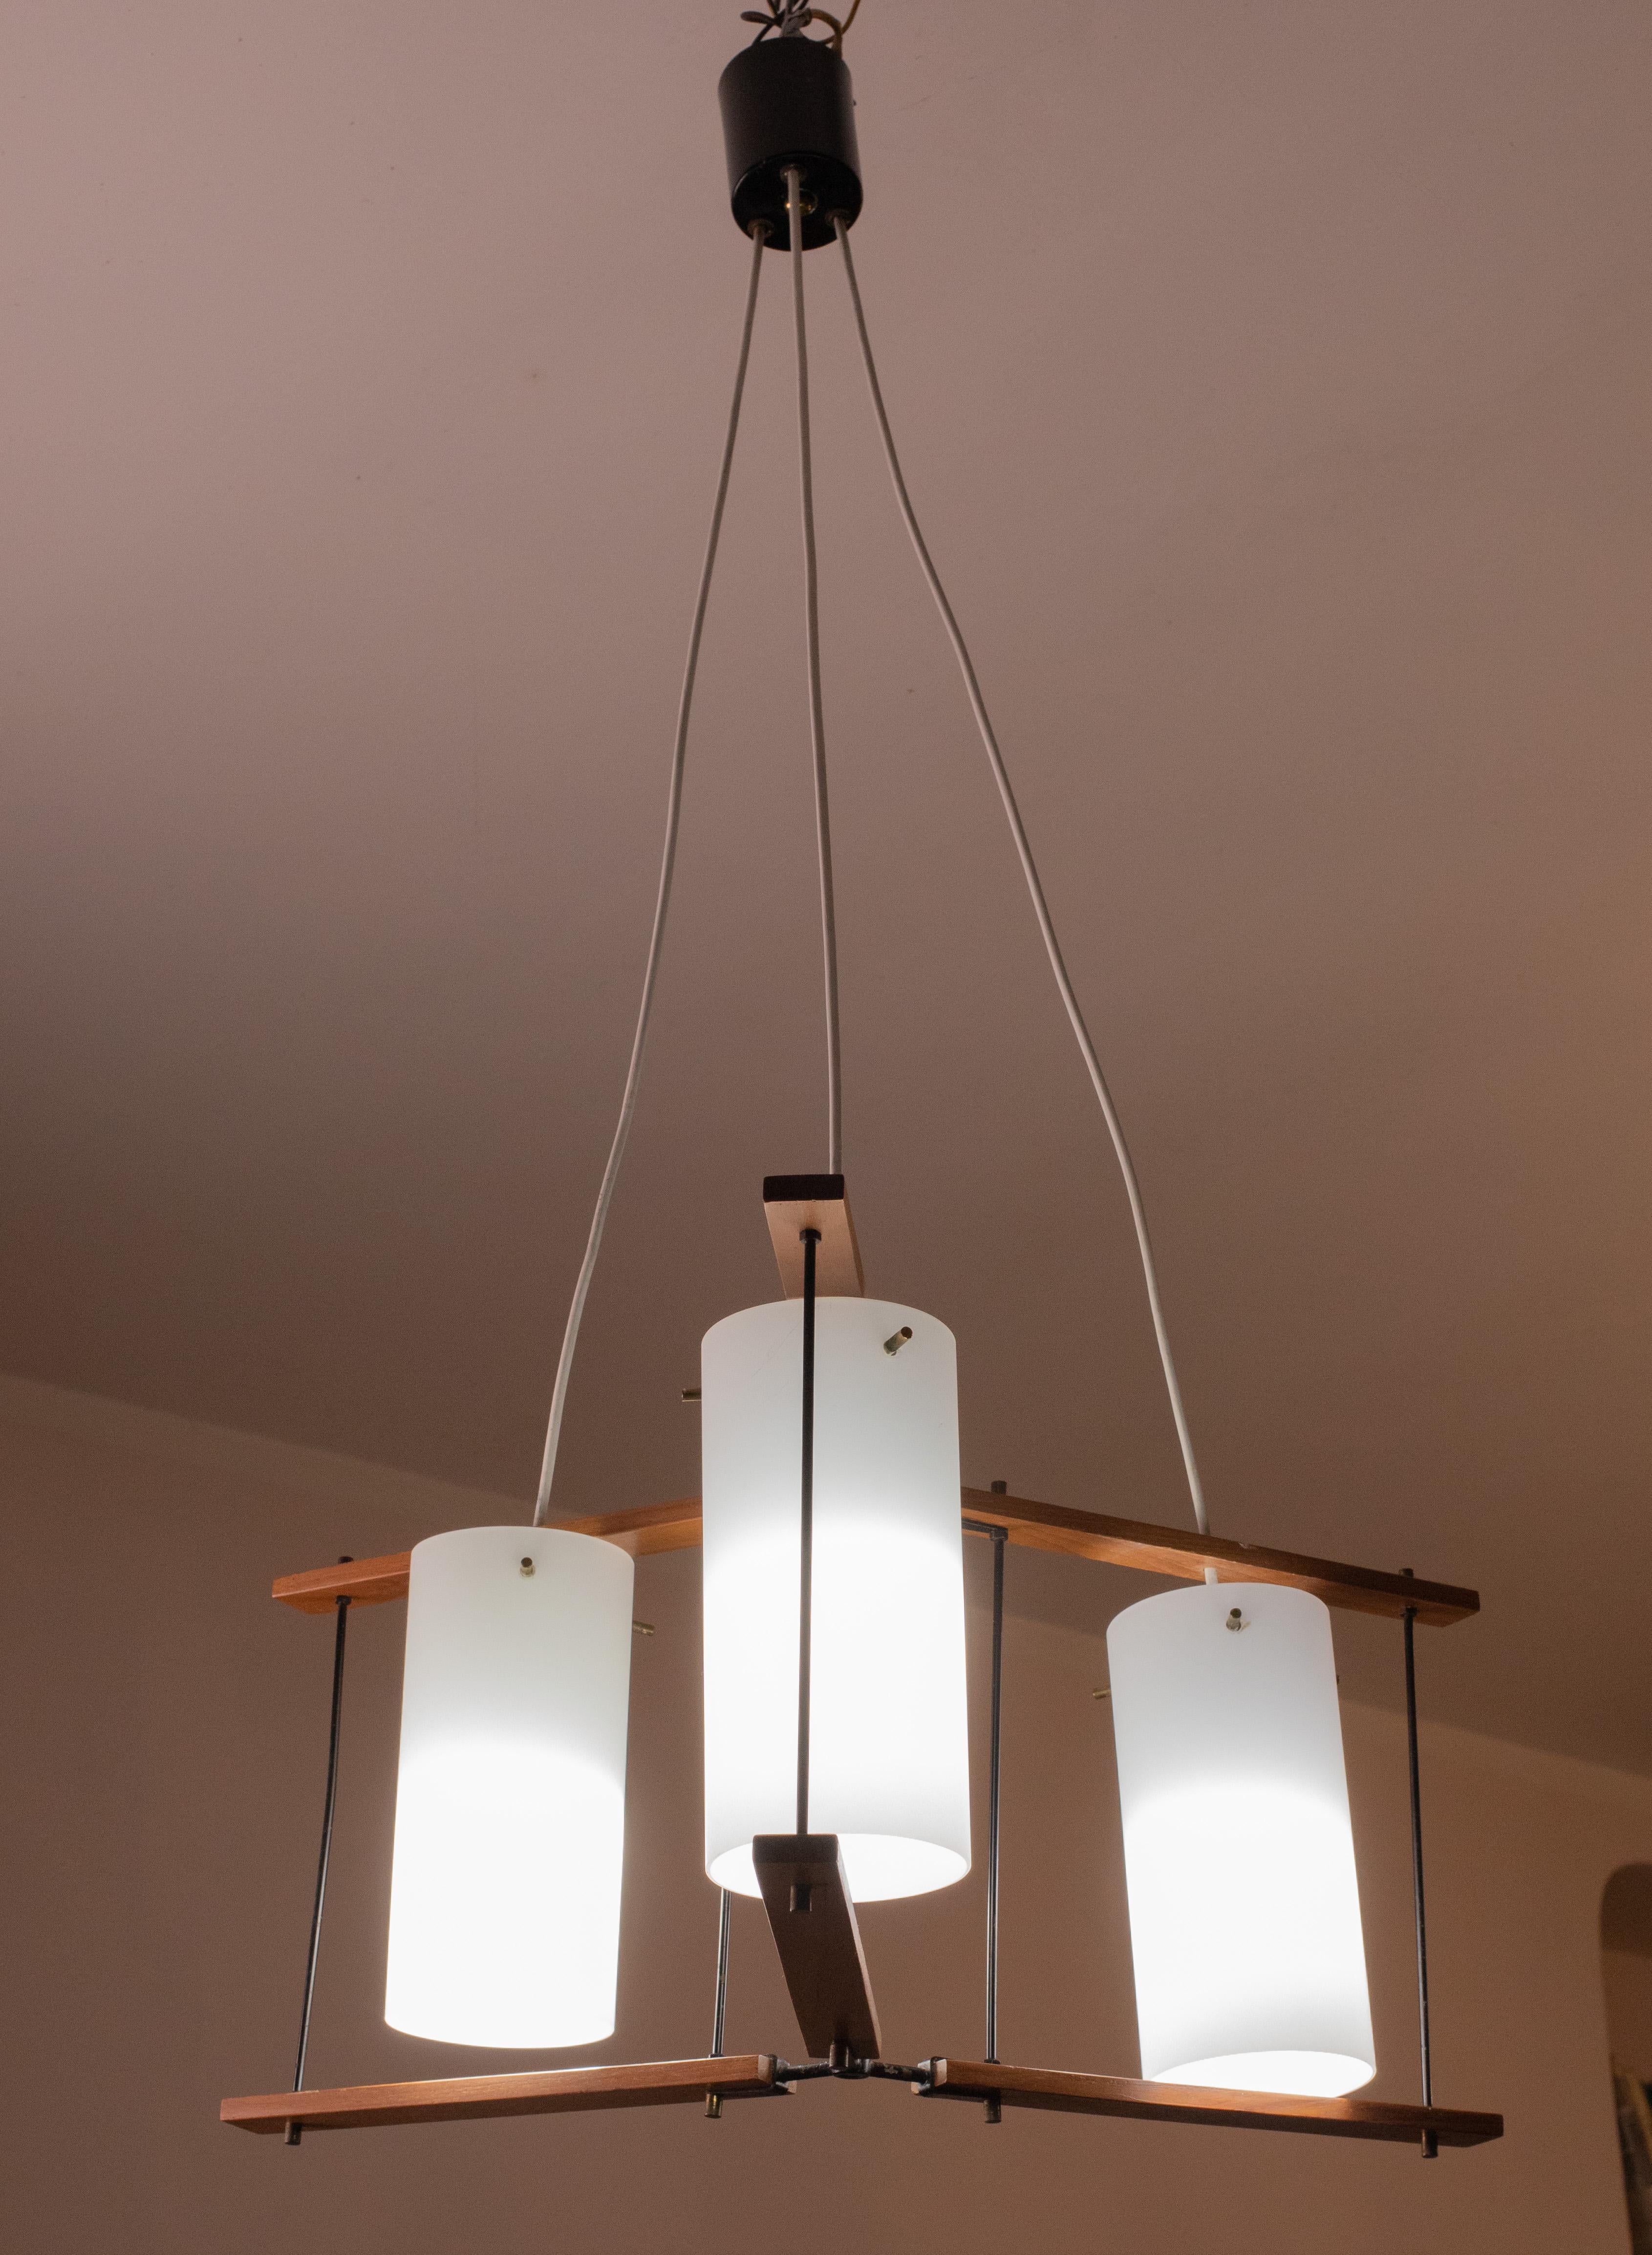 Mid-century Italian chandelier made of polished brass, wood and opaline glass, attributed to Stilnovo

The restoration was carried out with great care by a specialised craftsman to restore this piece to its original beauty.

The frame has some